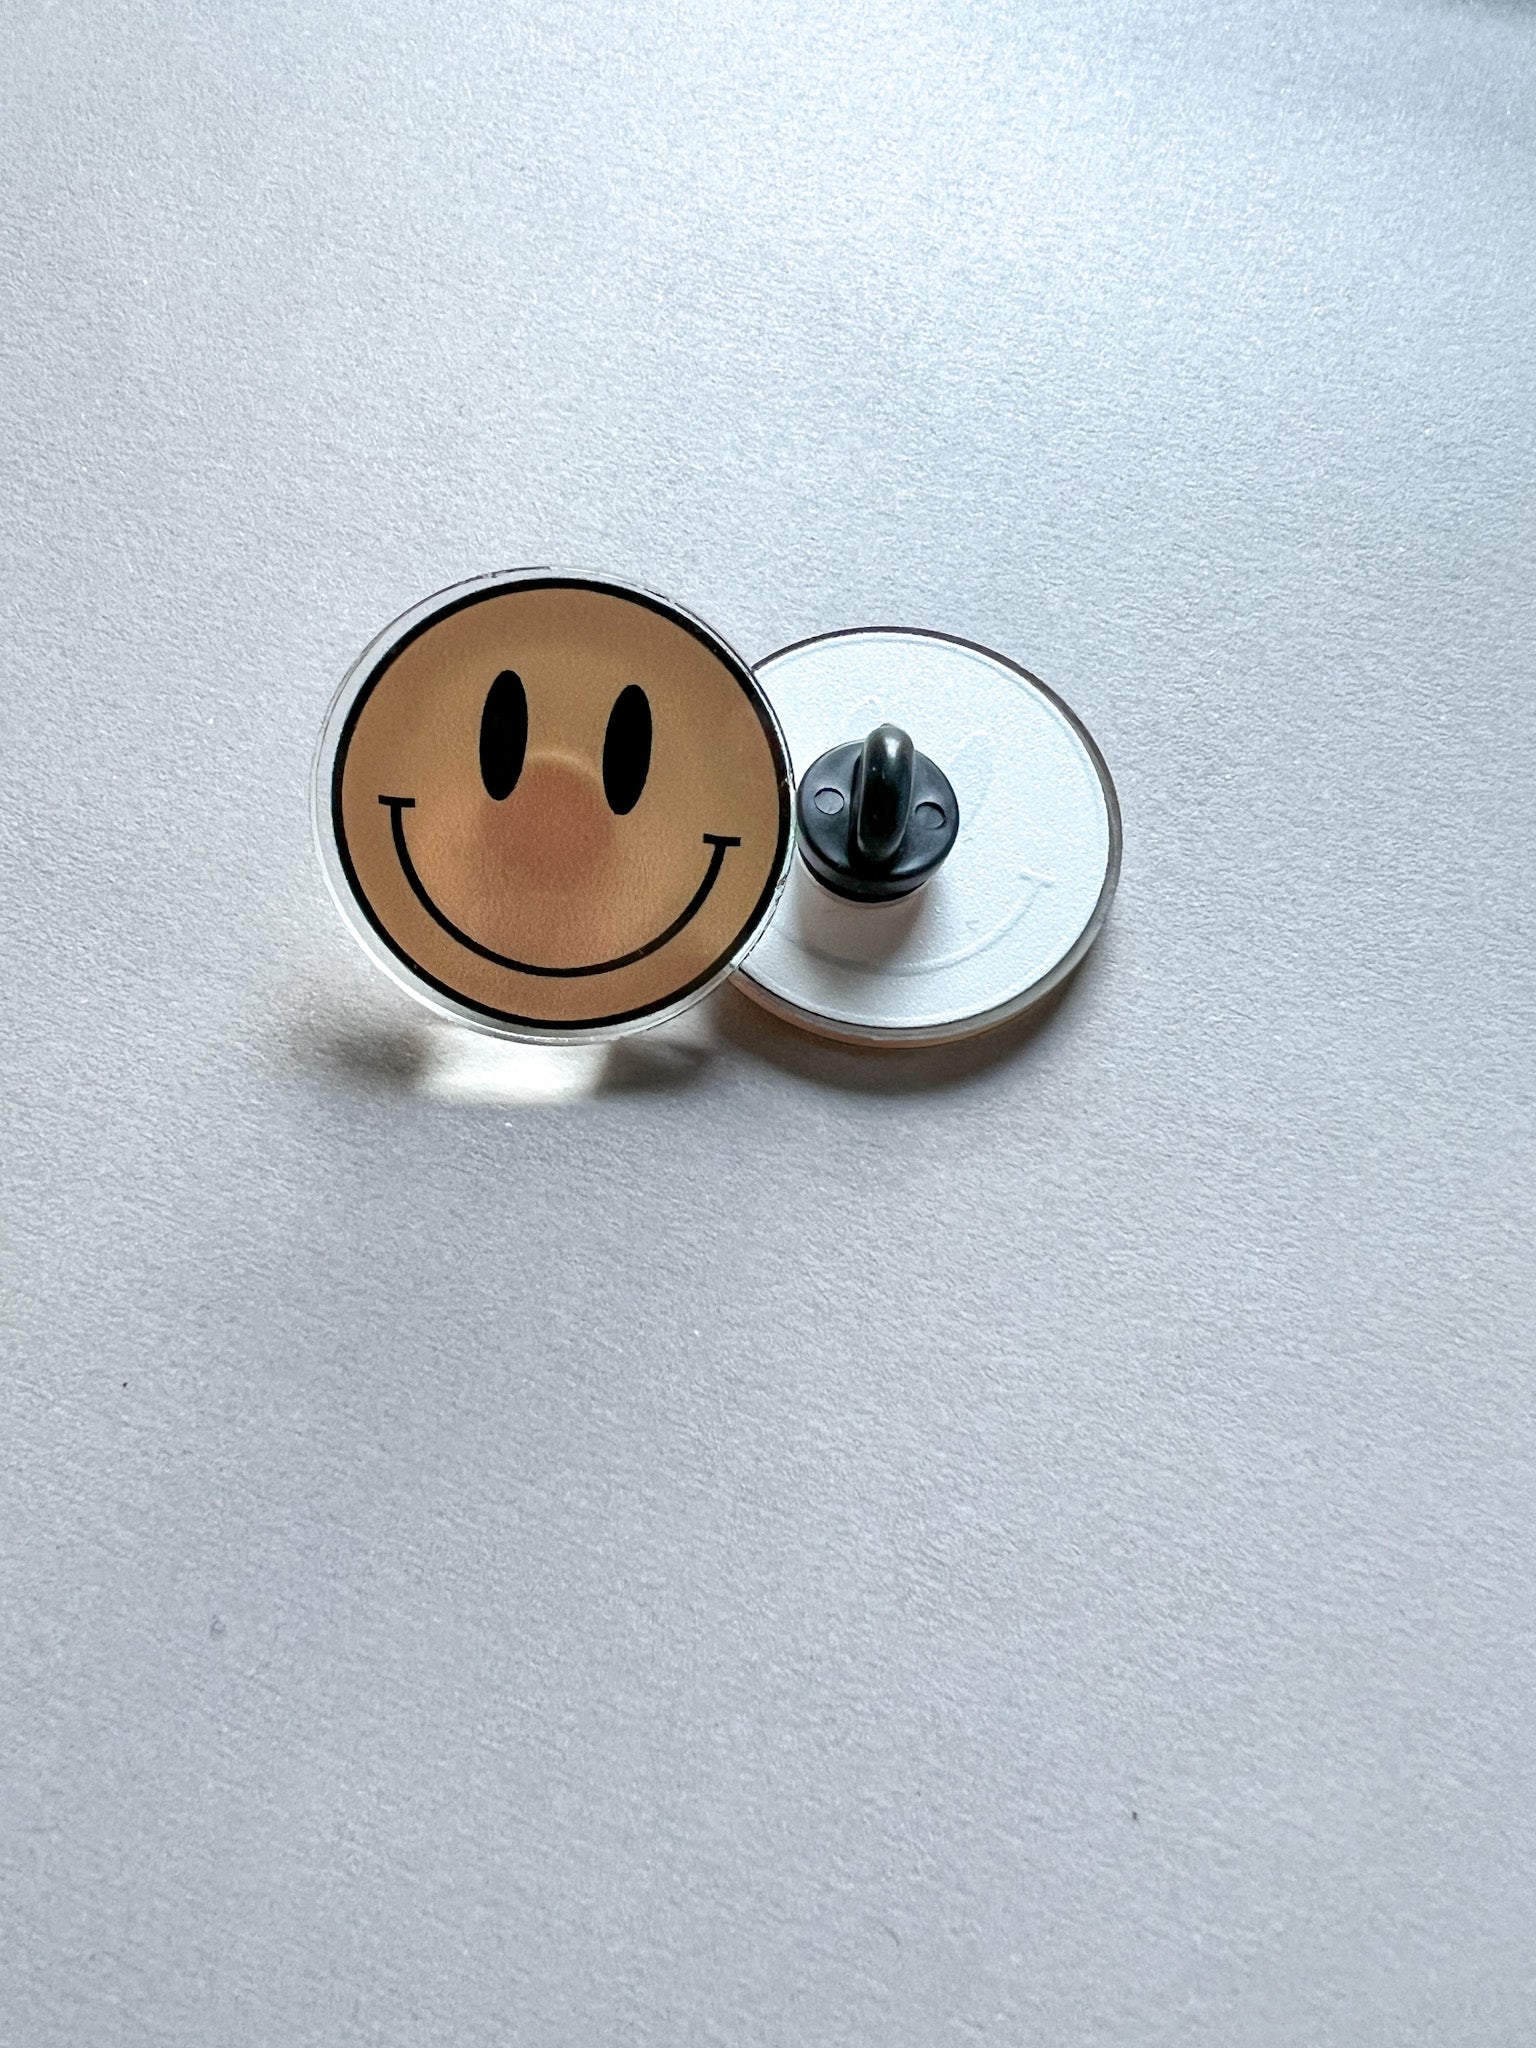 Mixed Smiley Face Acrylic Pin - Mosaic the Label